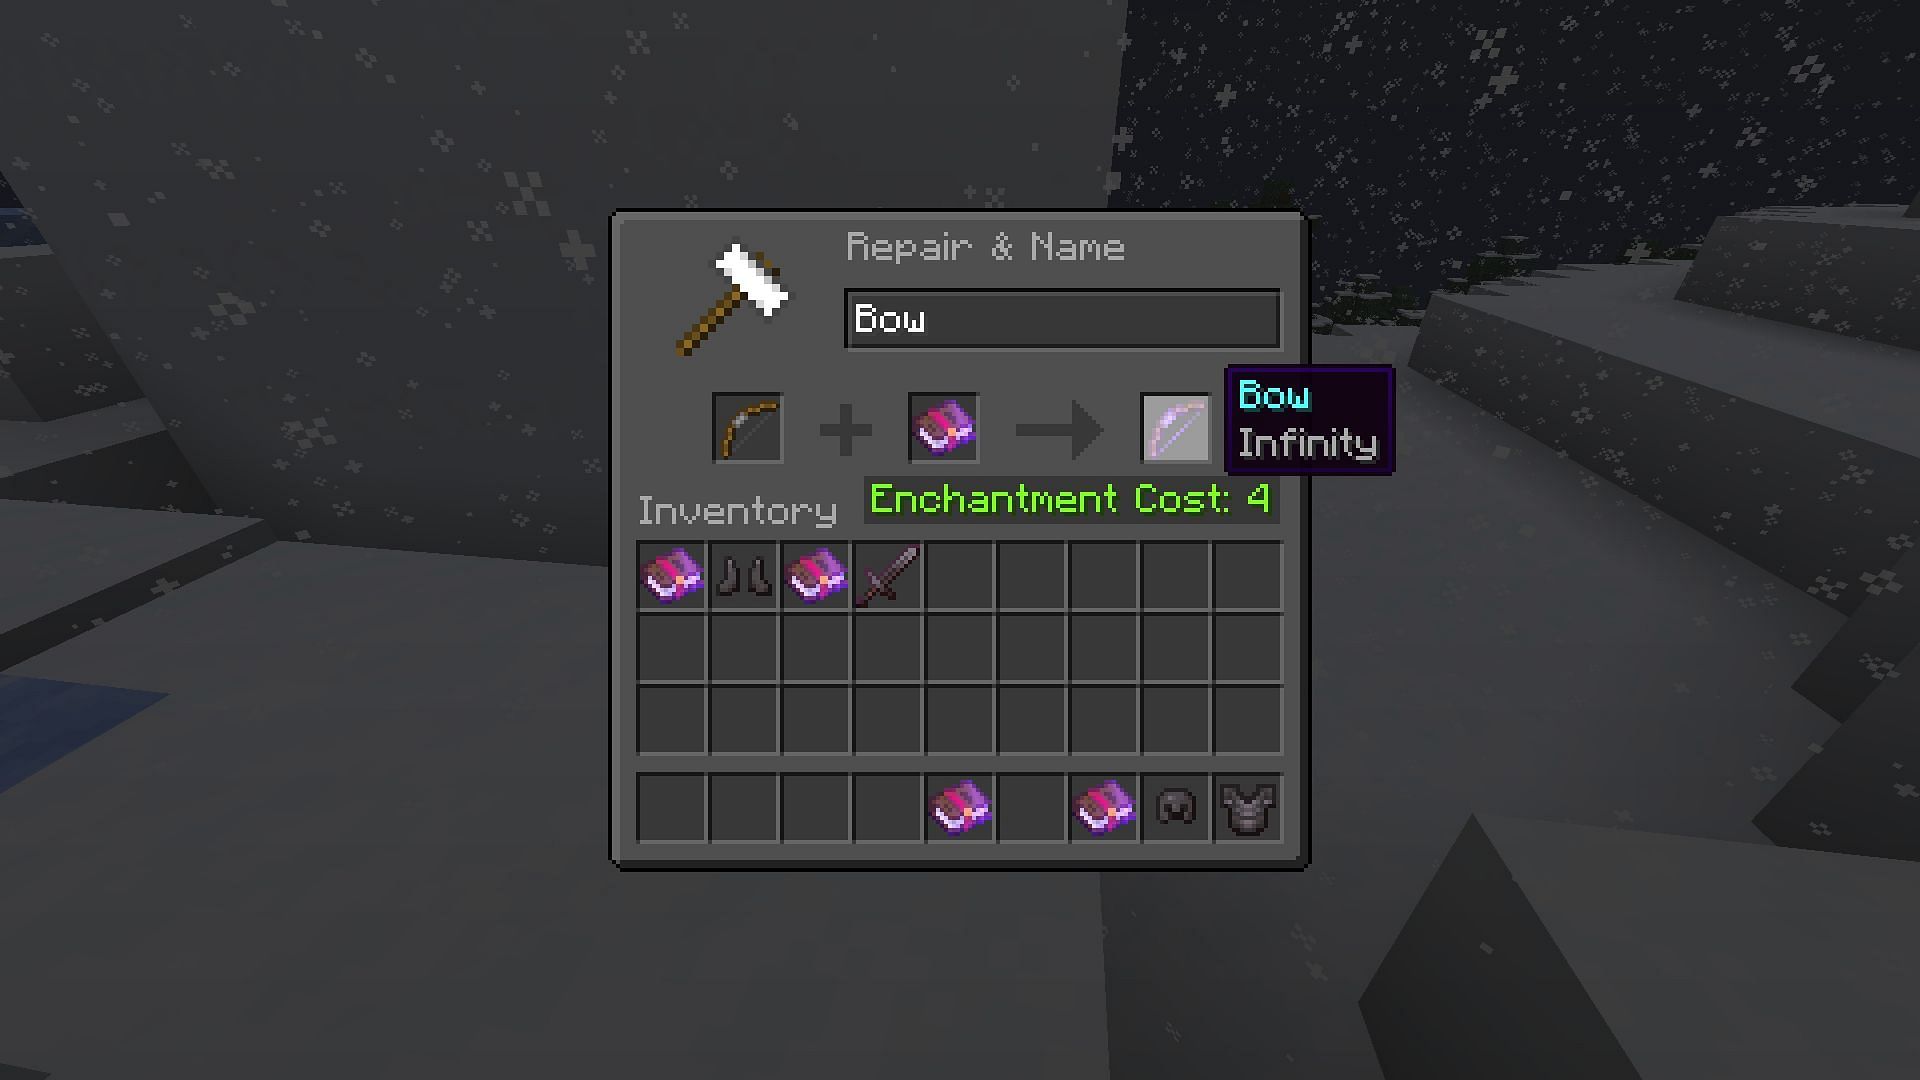 Infinity enchantment on a bow help players shoot unlimited arrows in Minecraft (Image via Mojang)